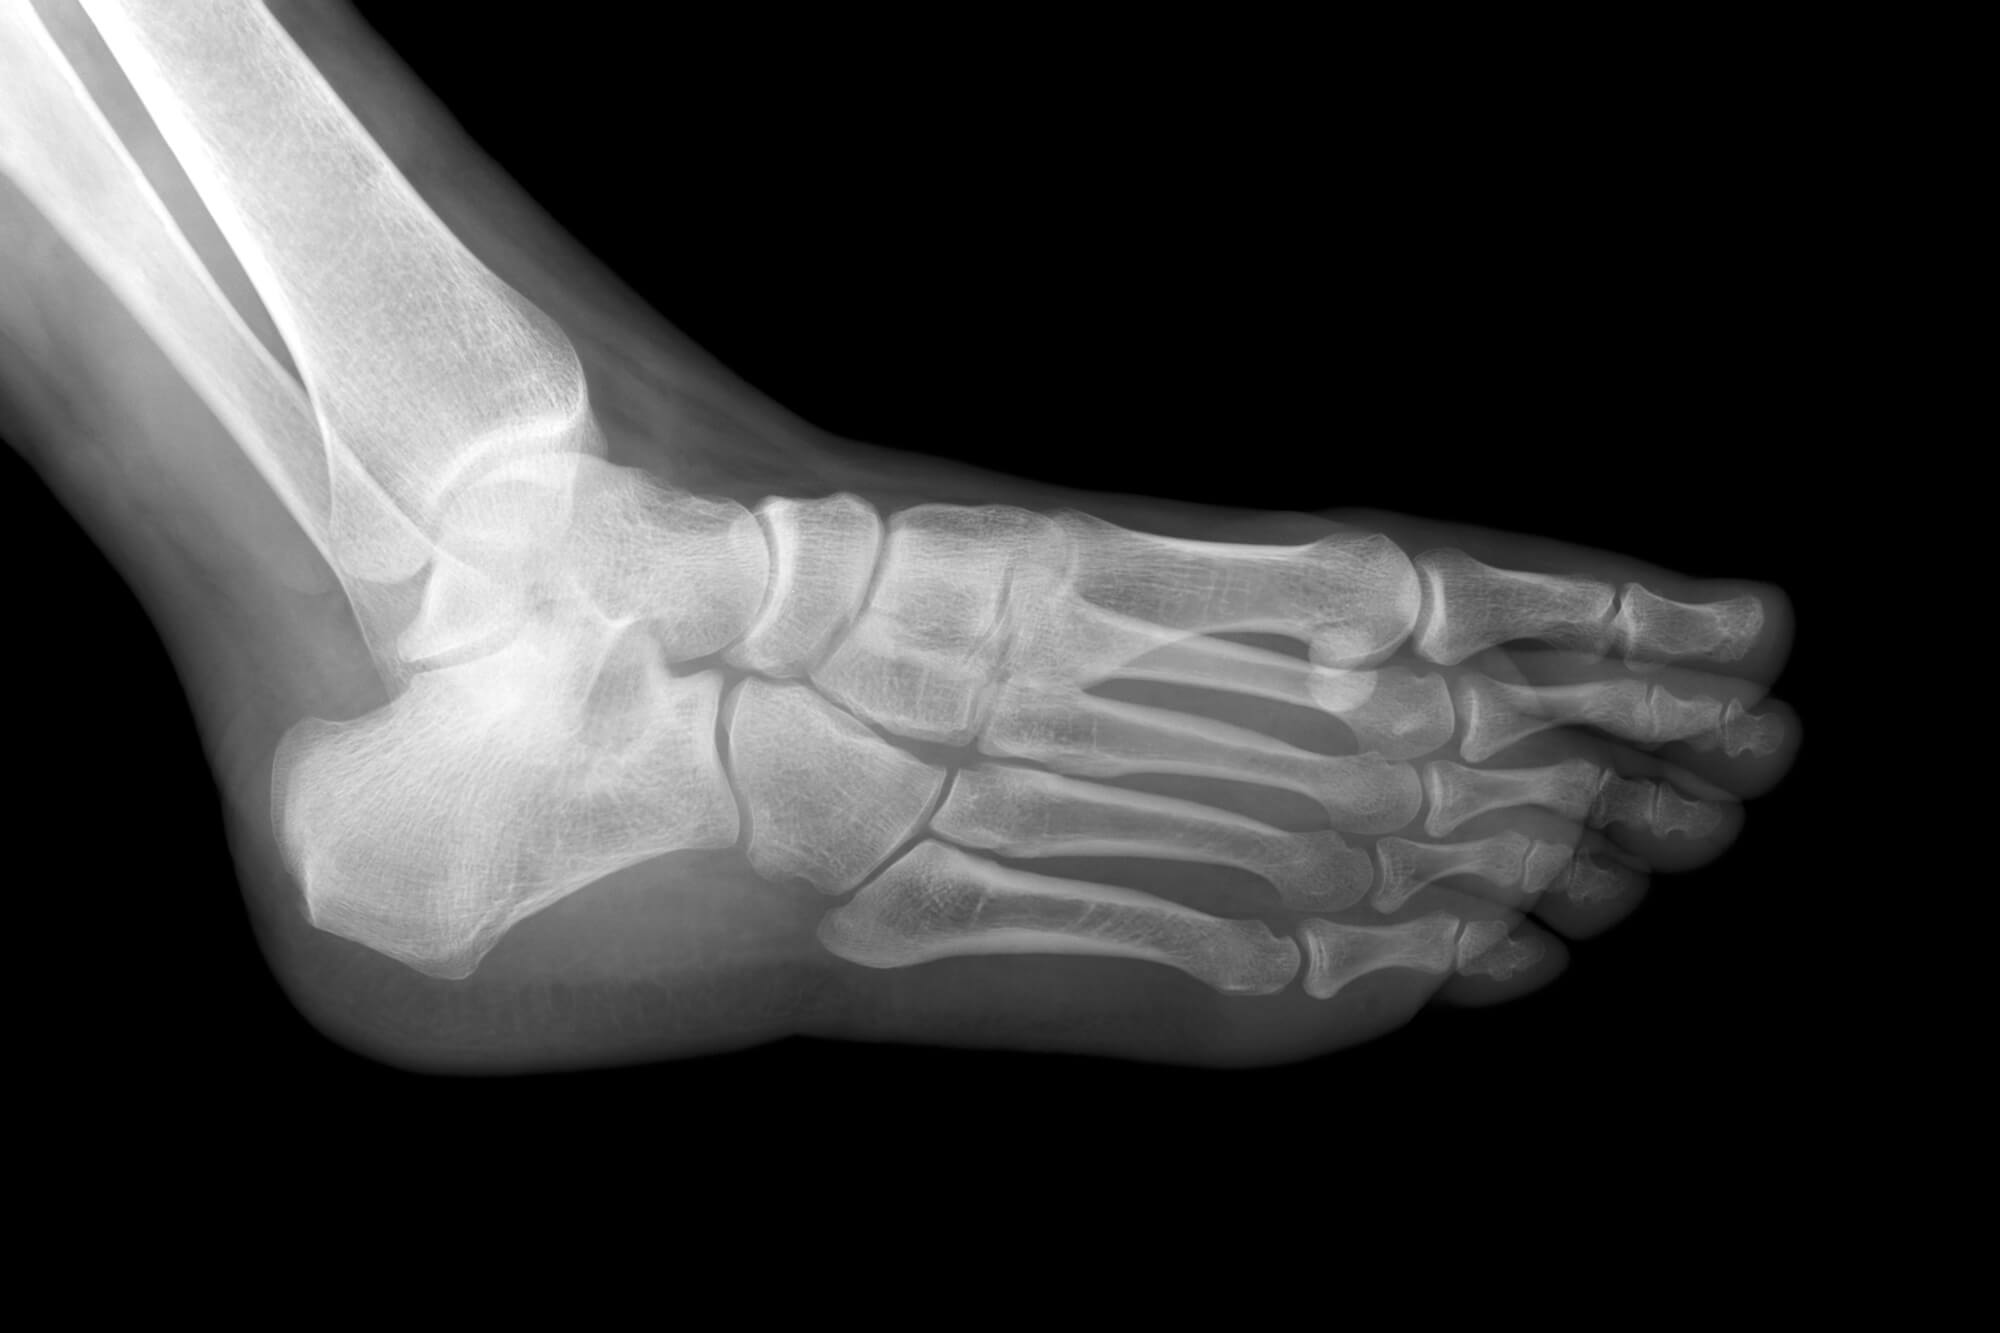 OrthoDx: Heel Pain in 12-Year-Old Boy - Clinical Advisor